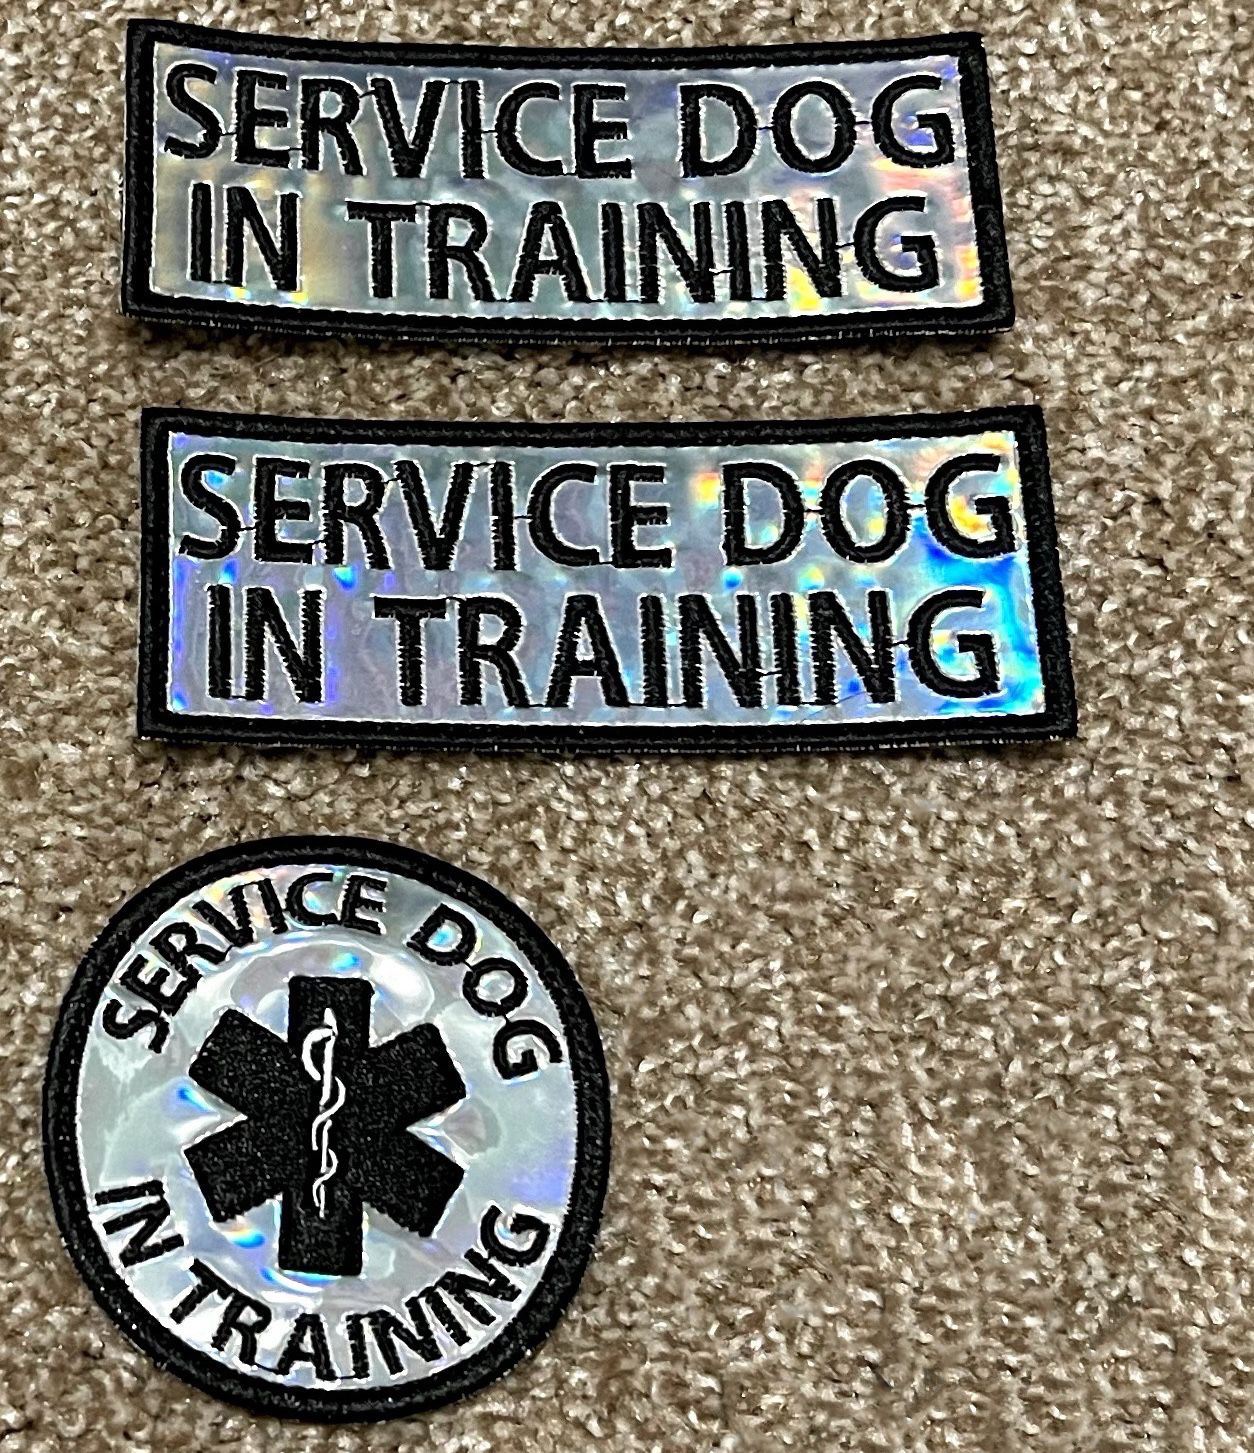 Service Dog In Training velcro patch set